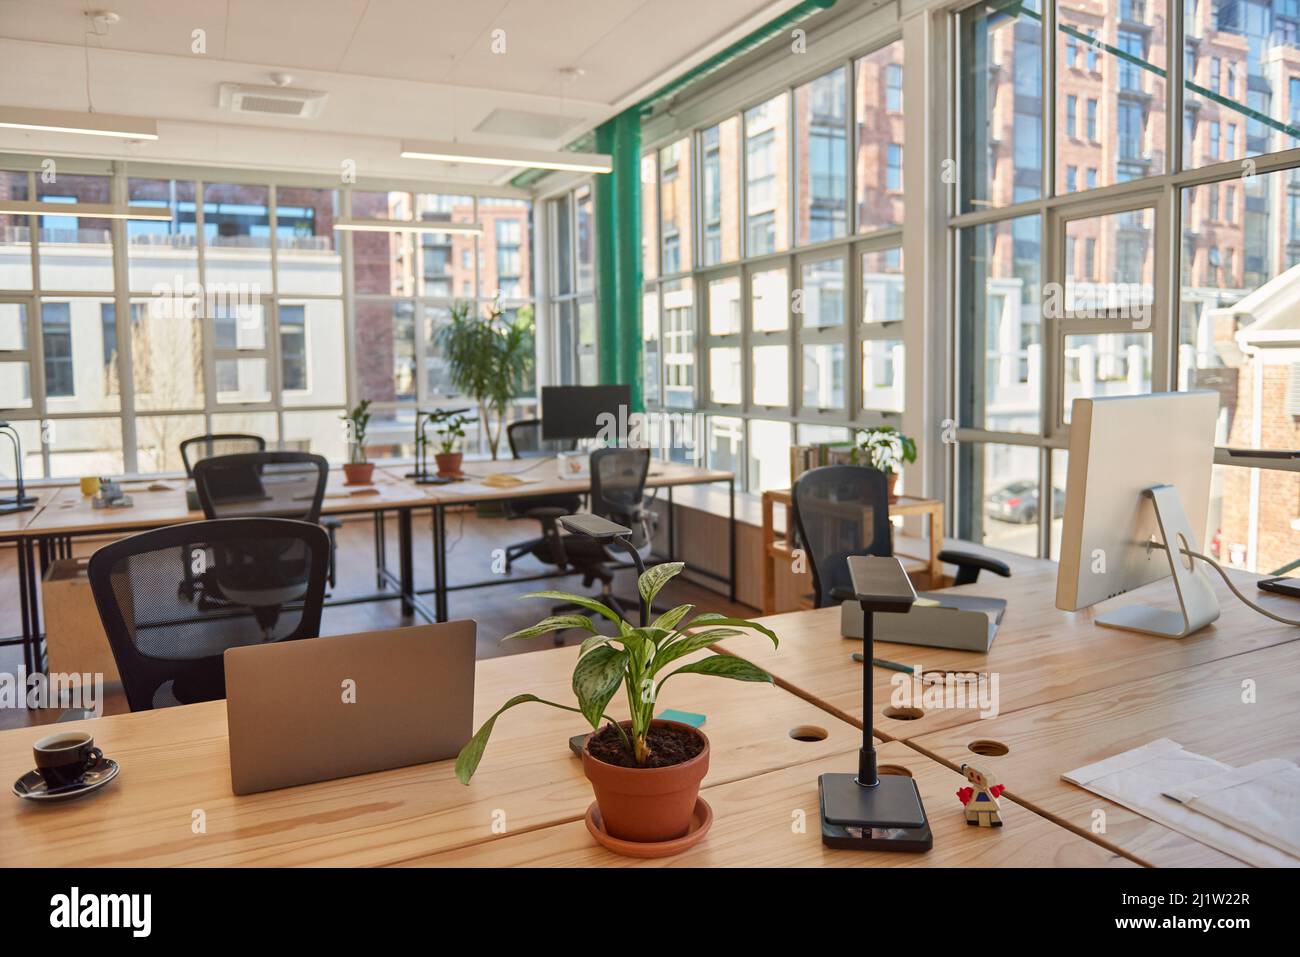 Interior of a modern office space at the end of the work day Stock Photo